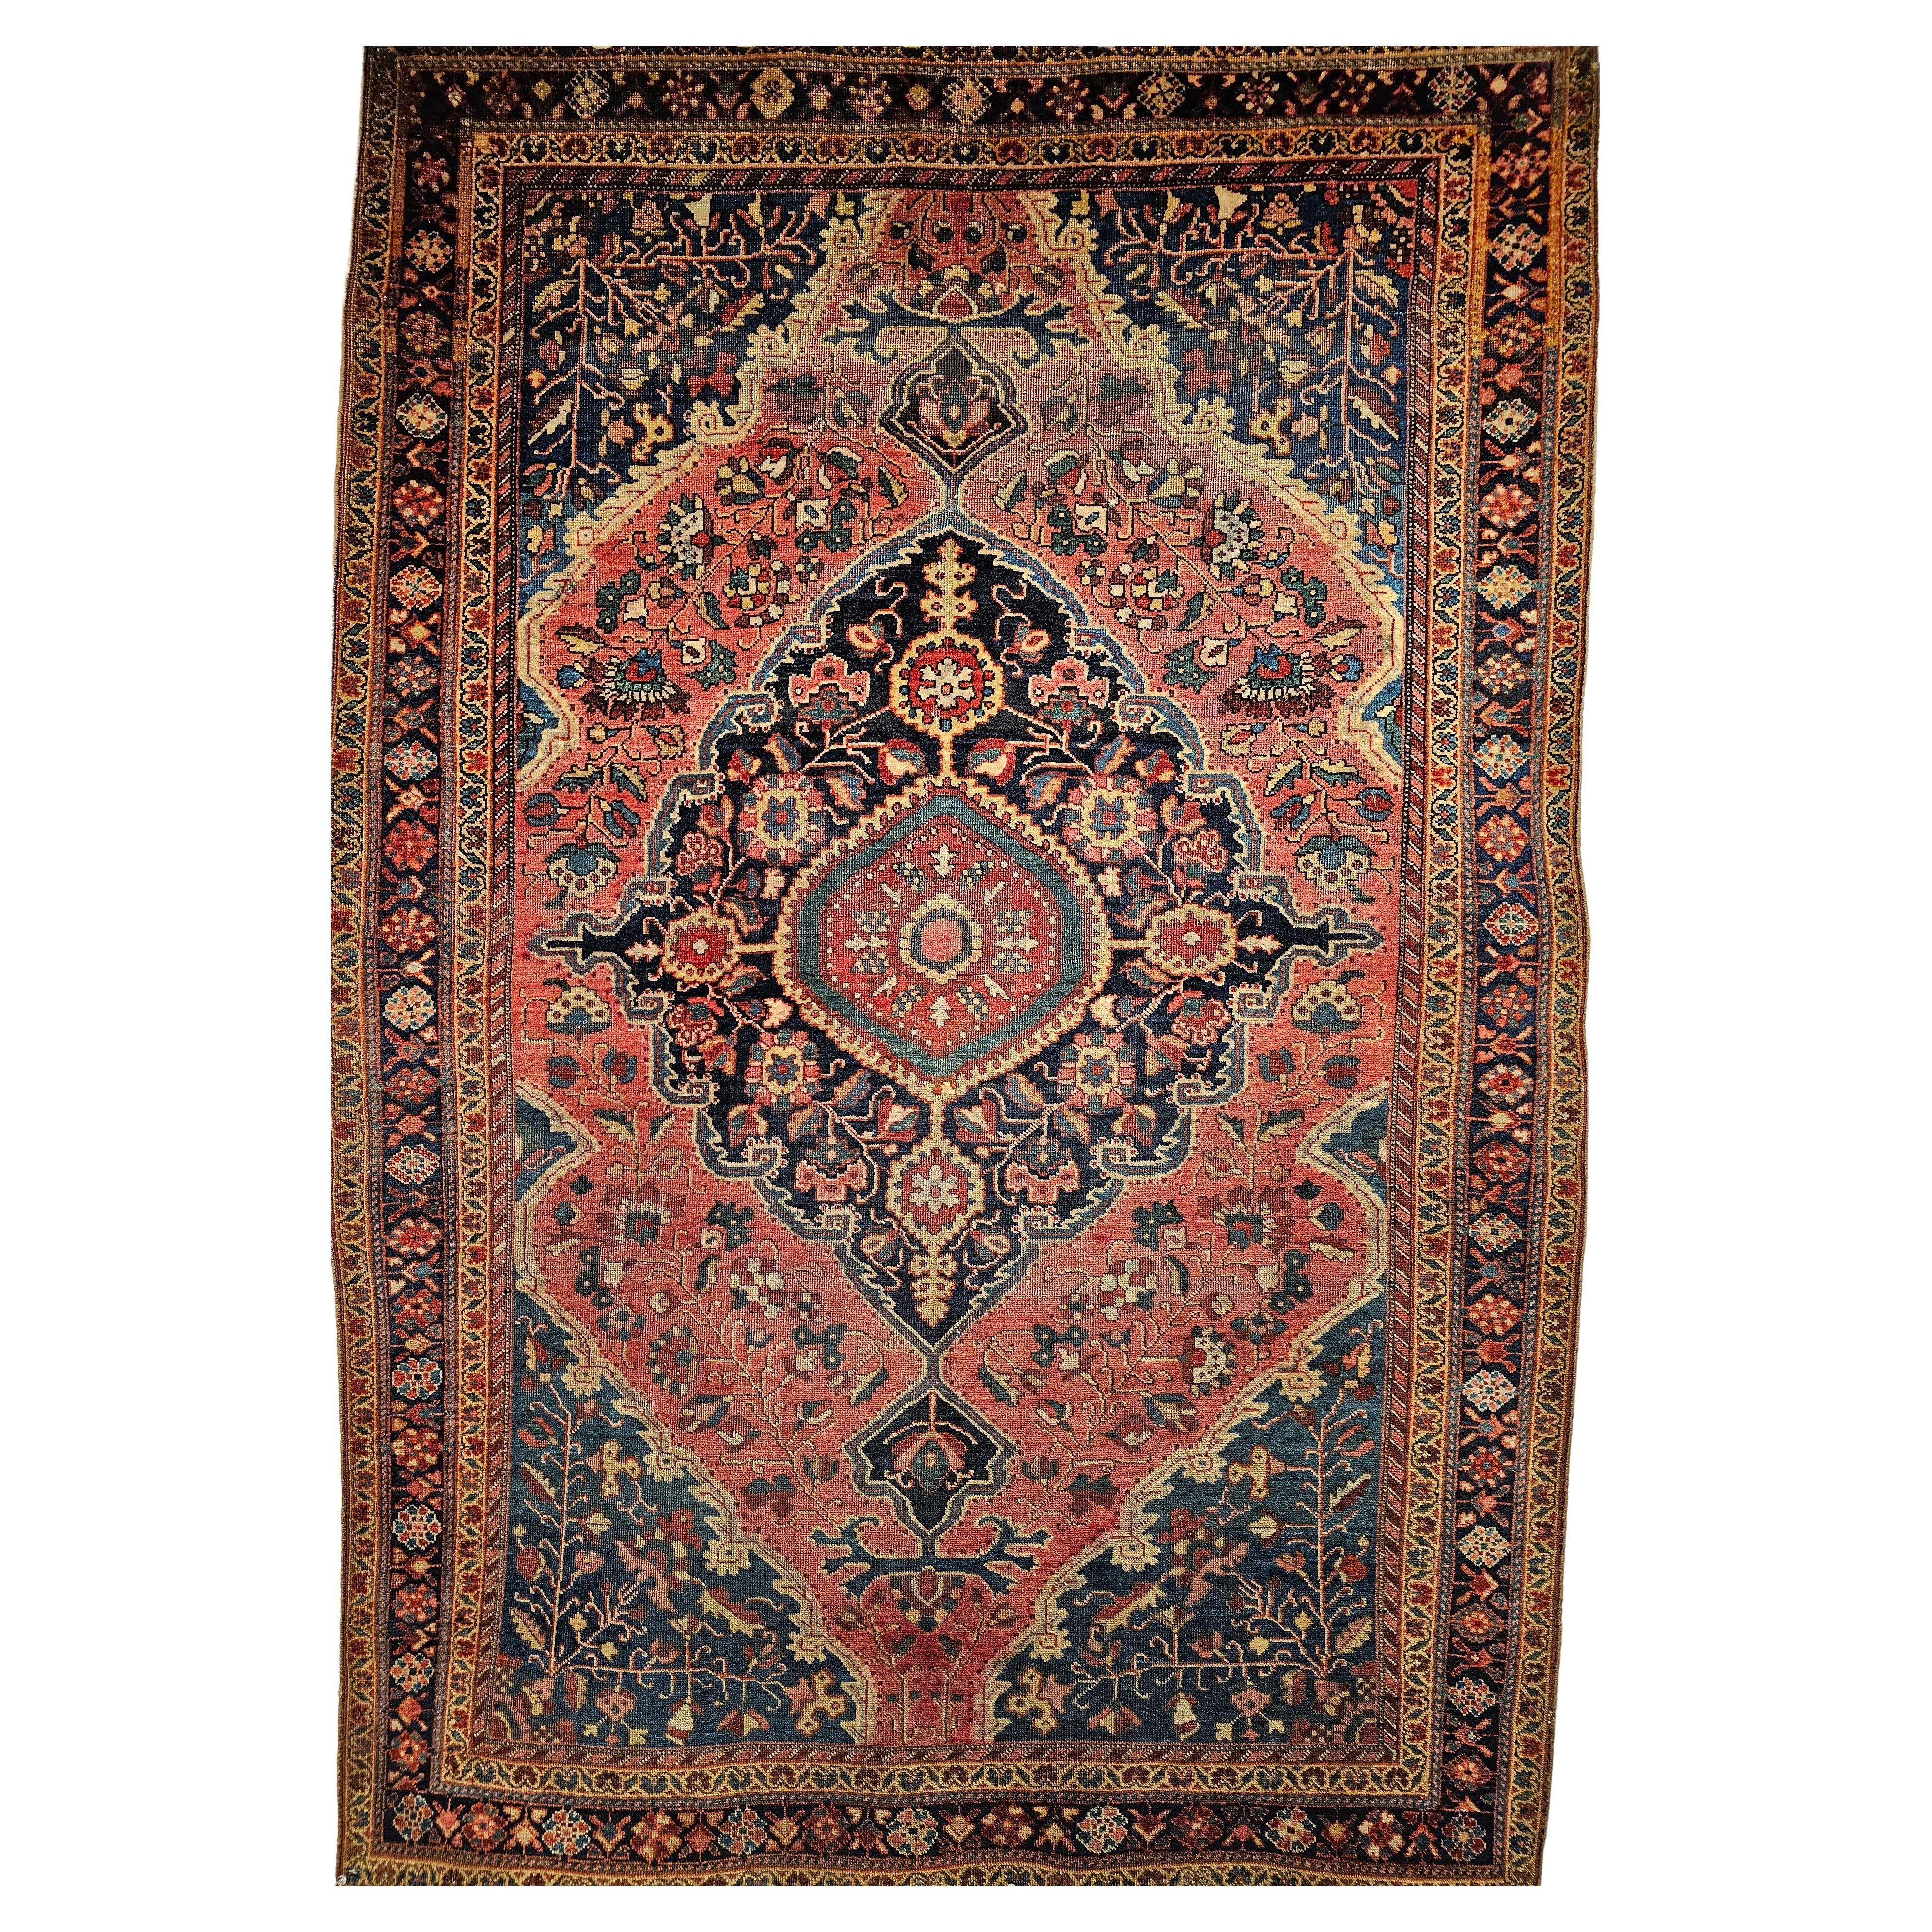 19th Century Persian Farahan Sarouk Area Rug in Rust Red, French Blue, Navy Blue